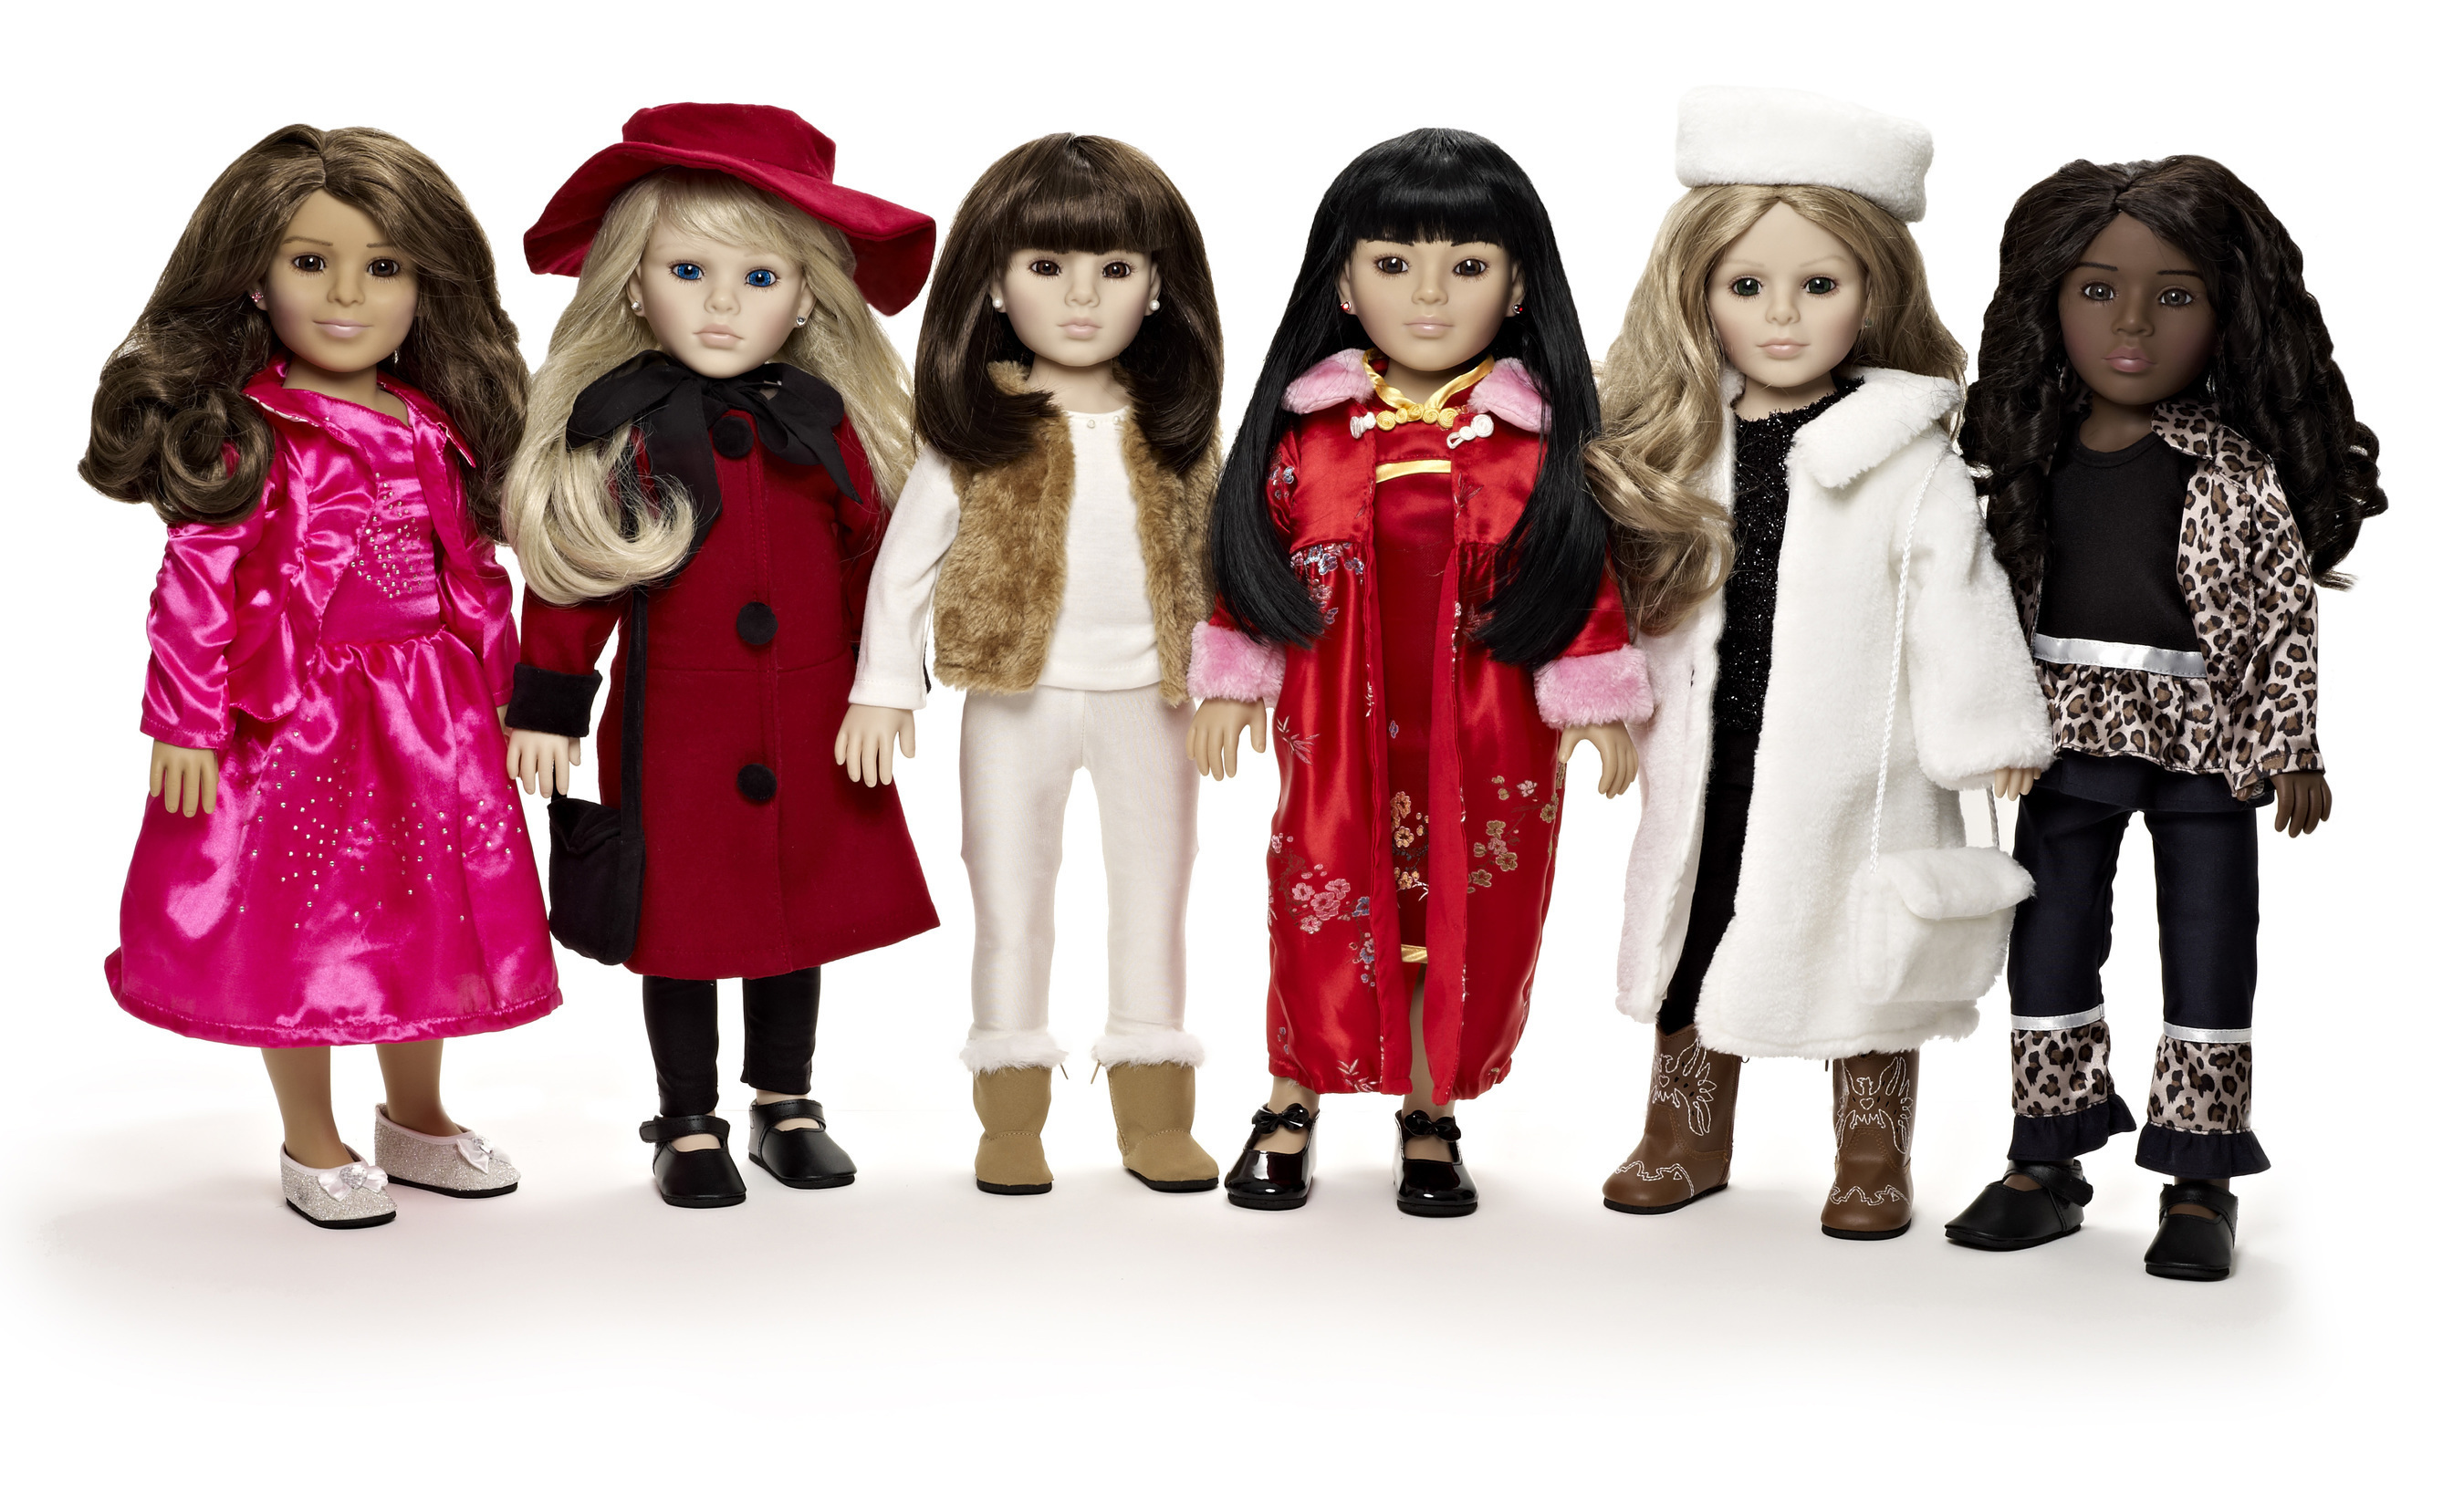 Global Girl Launches Innovative Collection of Ethnically Diverse Dolls and Books. (PRNewsFoto/Three Daughters International)